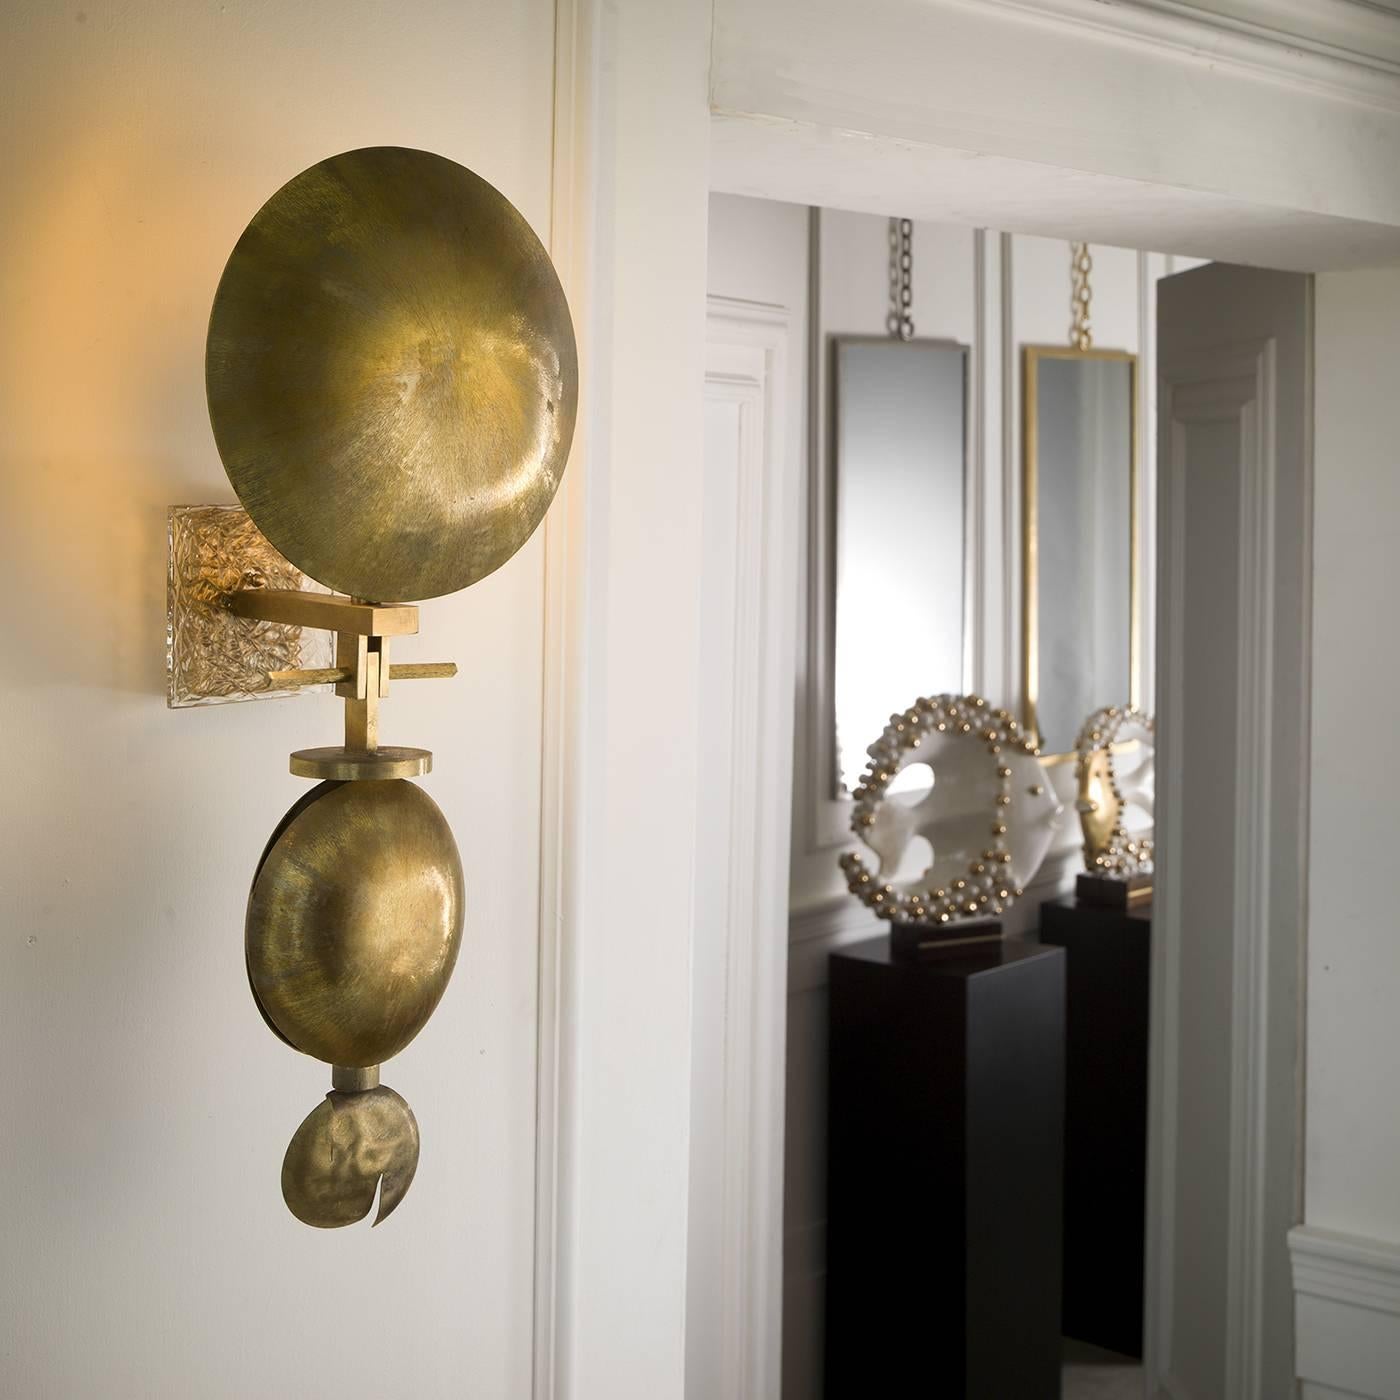 This sconce will best complement a contemporary environment with its impressive structure composed of three natural brass discs arranged in a linear configuration from largest to smallest. The fabric-like texture given to the brass discs was